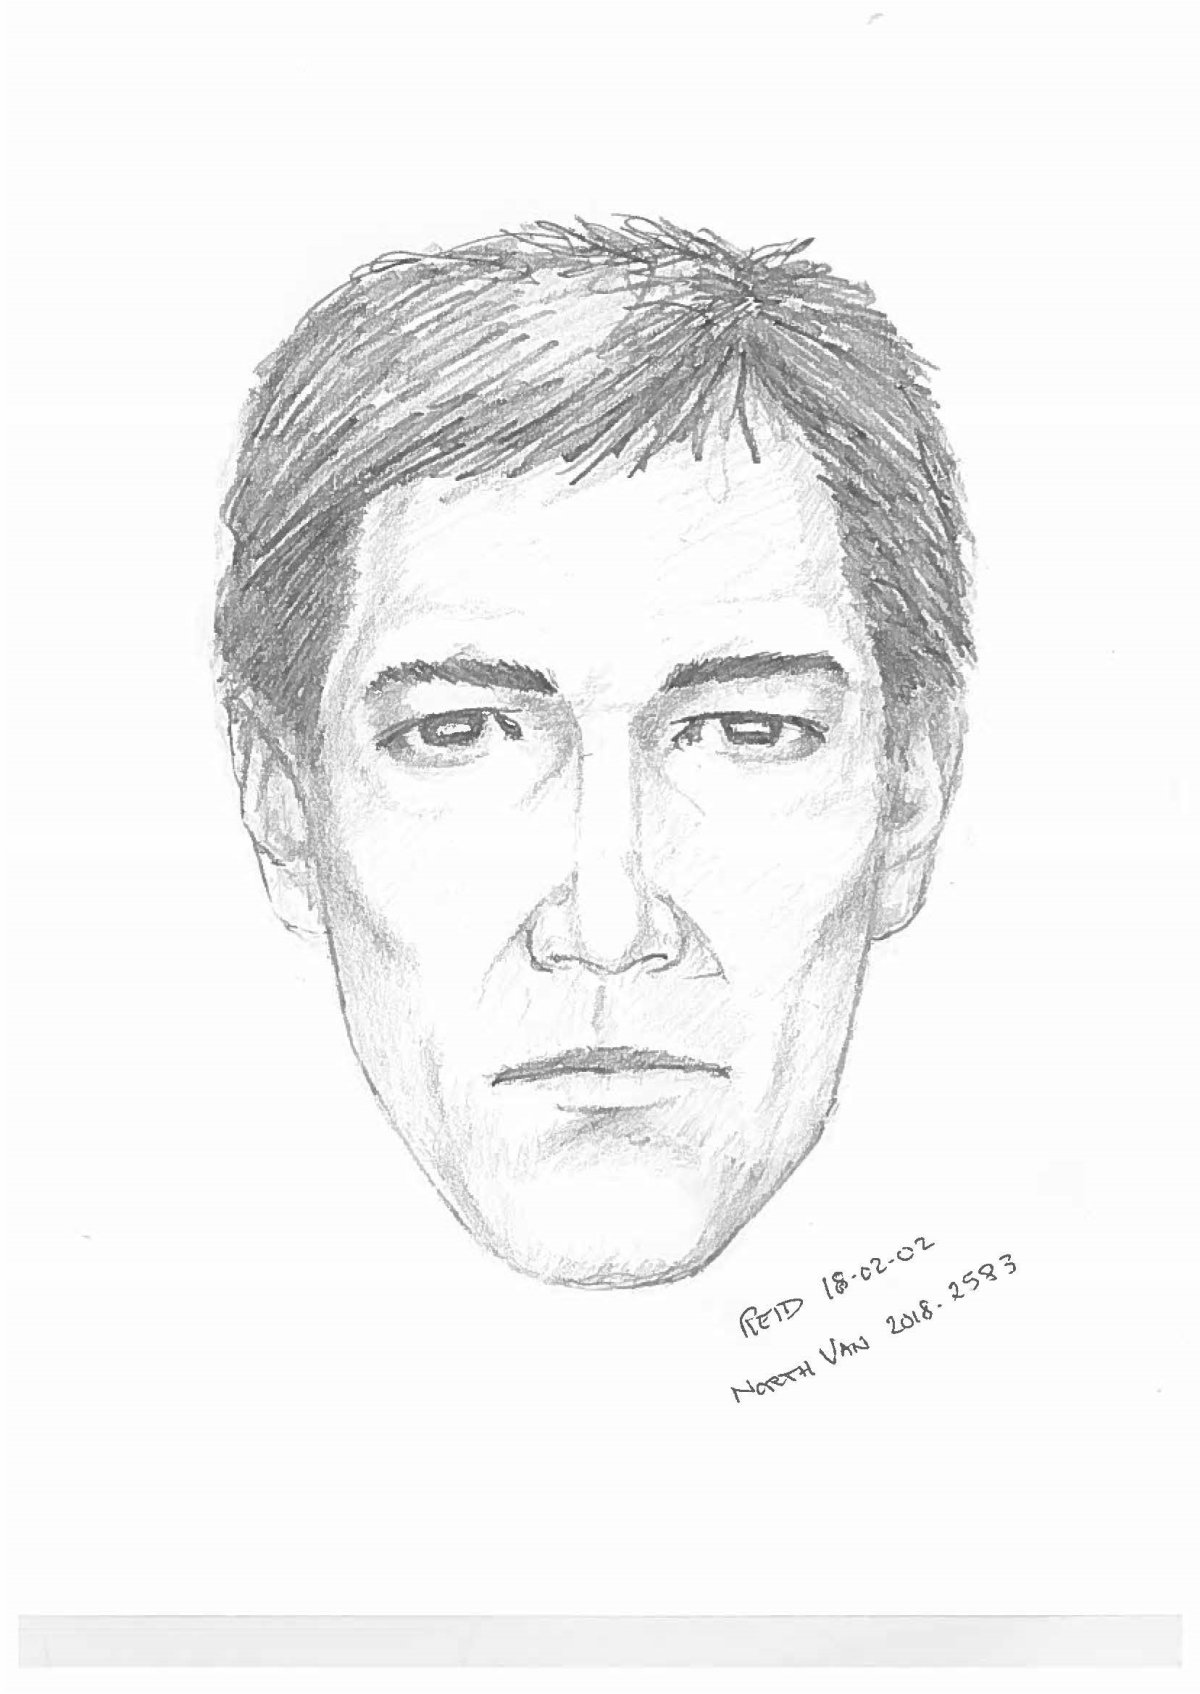 Sketch of the suspect as described by the victim.